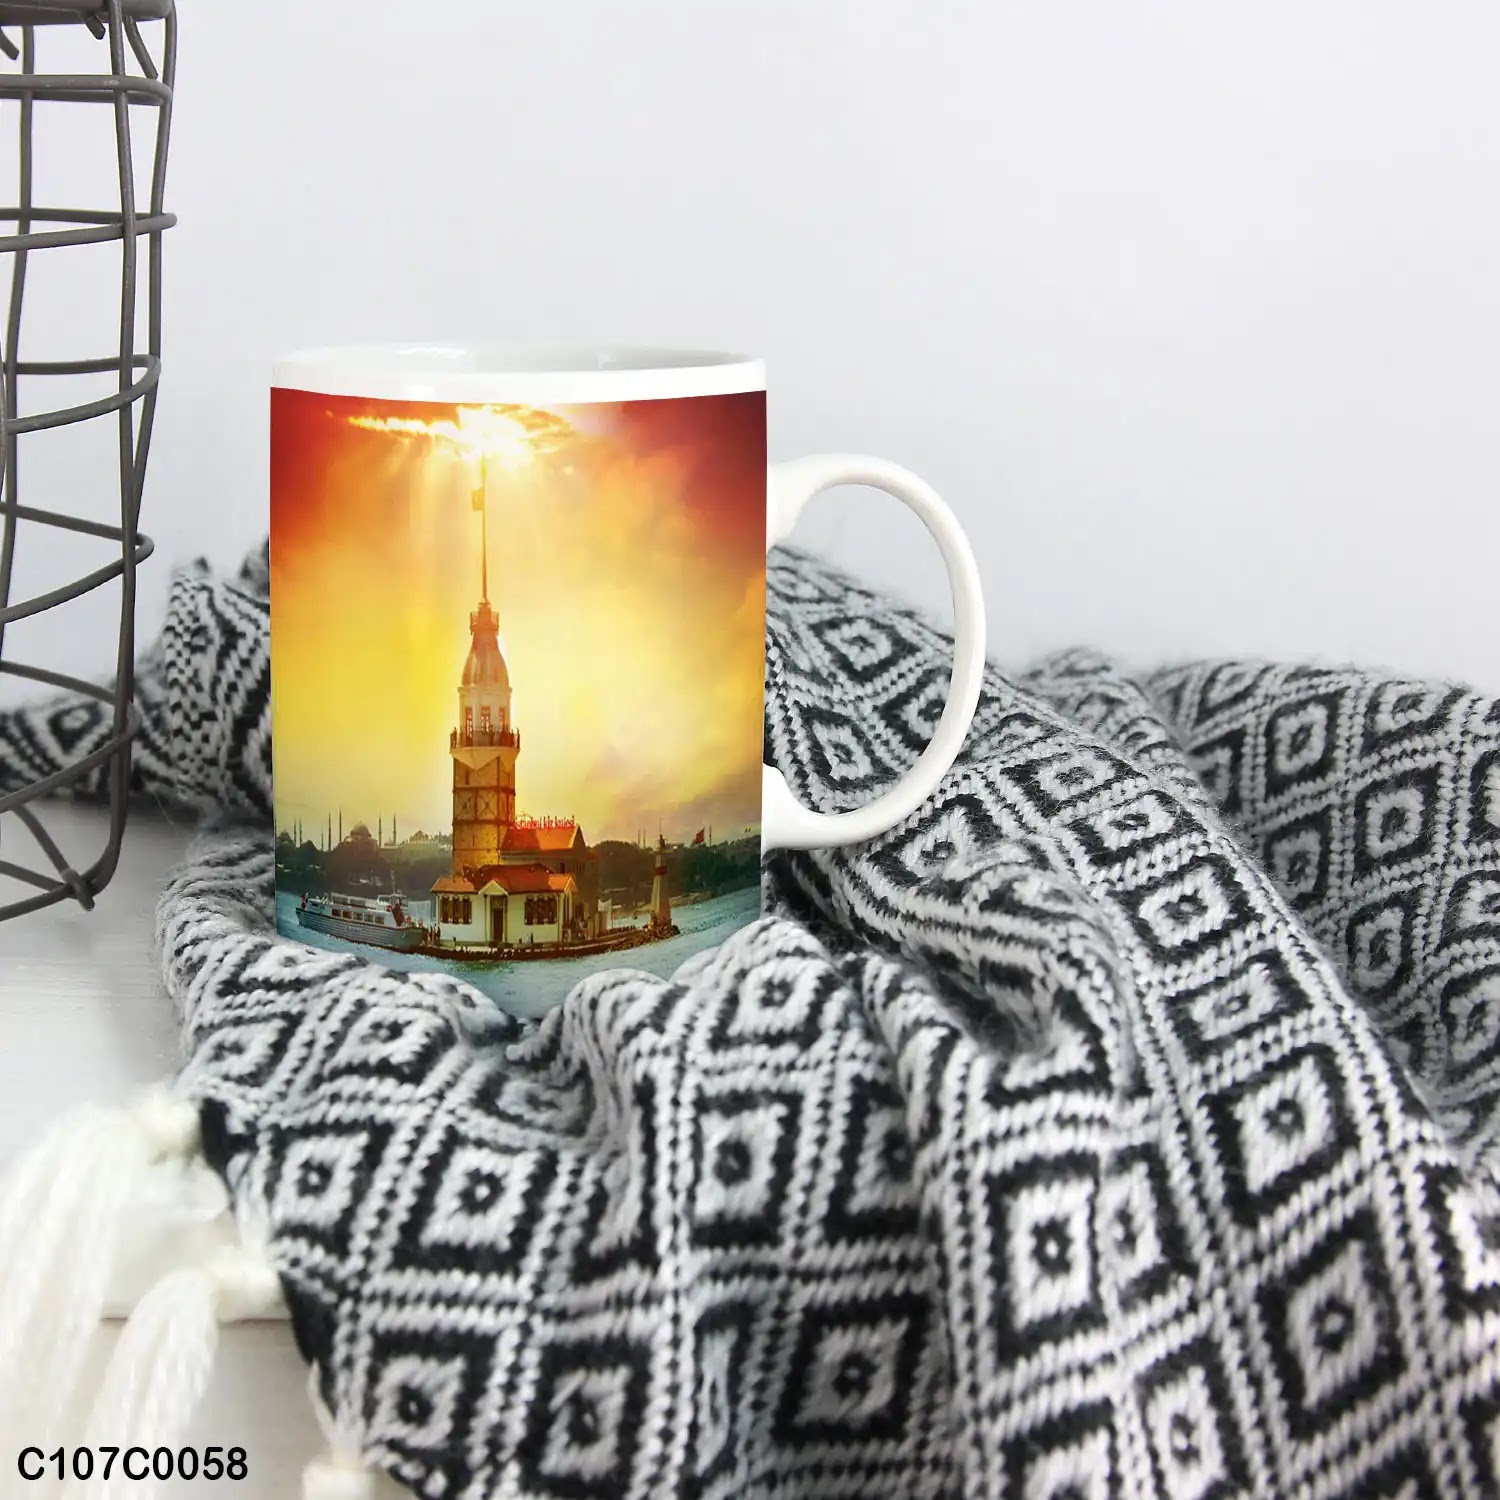 A mug (cup) printed with an image of Maiden tower at sunset